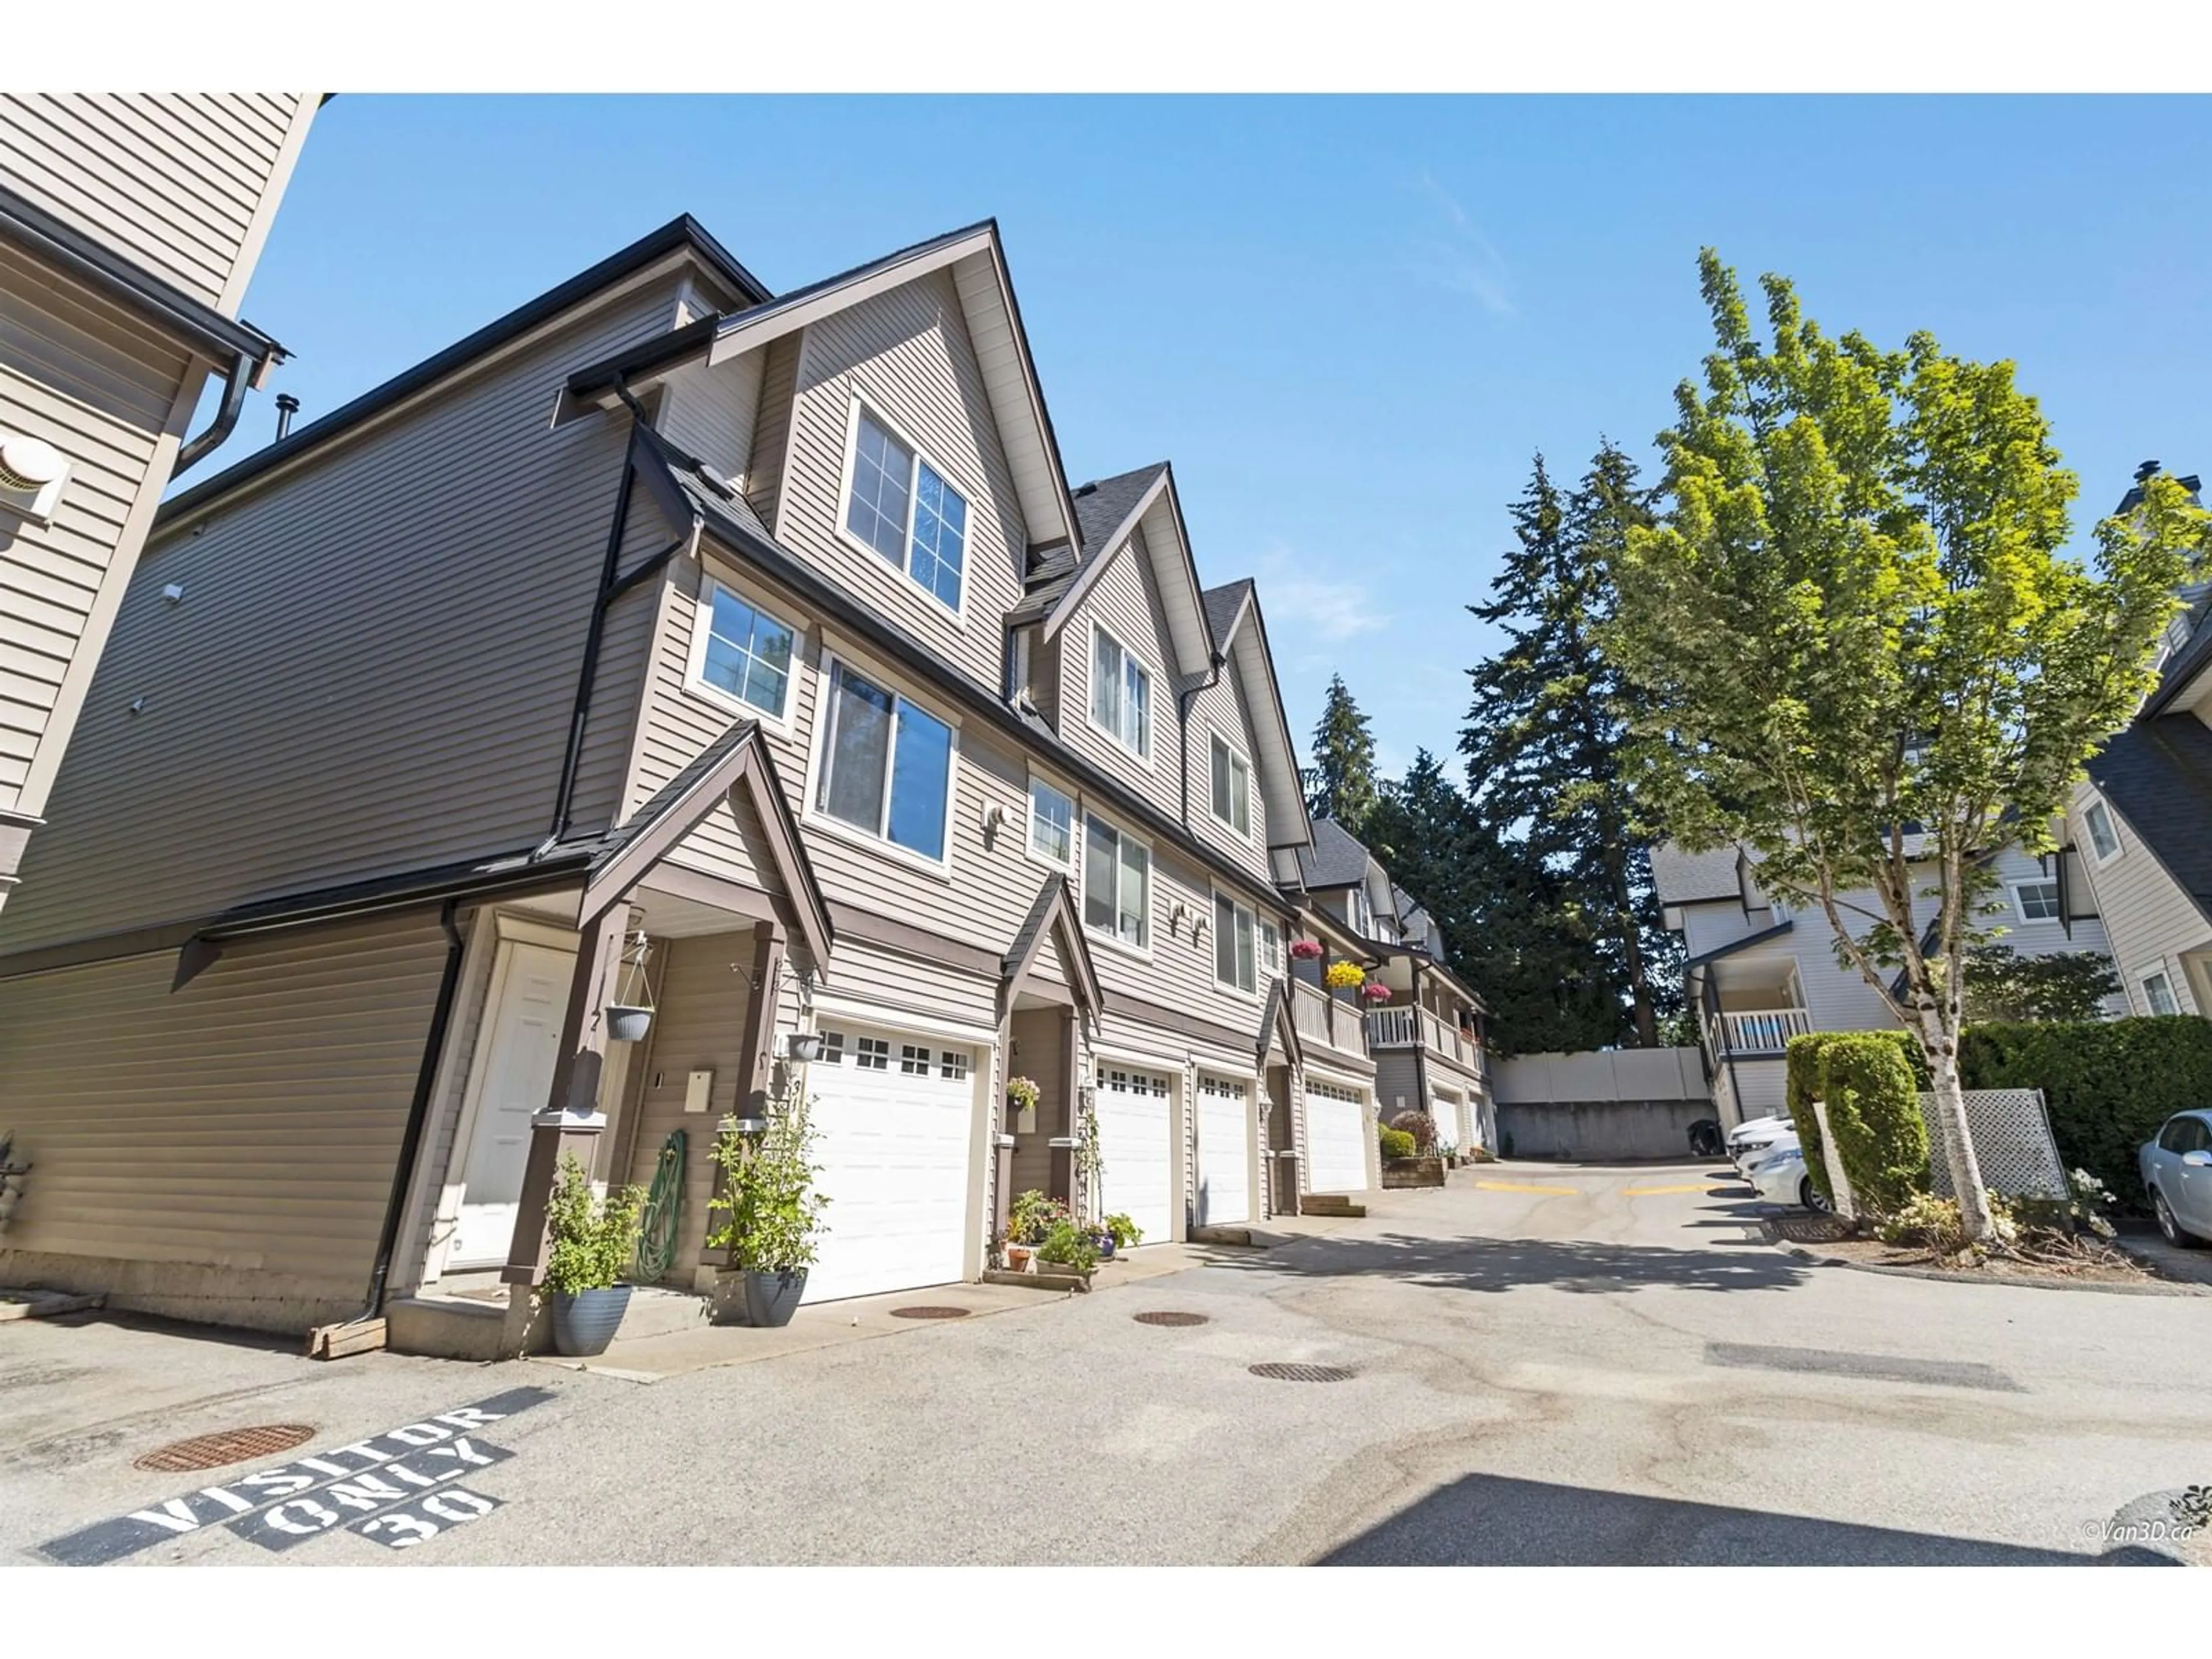 A pic from exterior of the house or condo for 29 15355 26 AVENUE, Surrey British Columbia V4P1C4